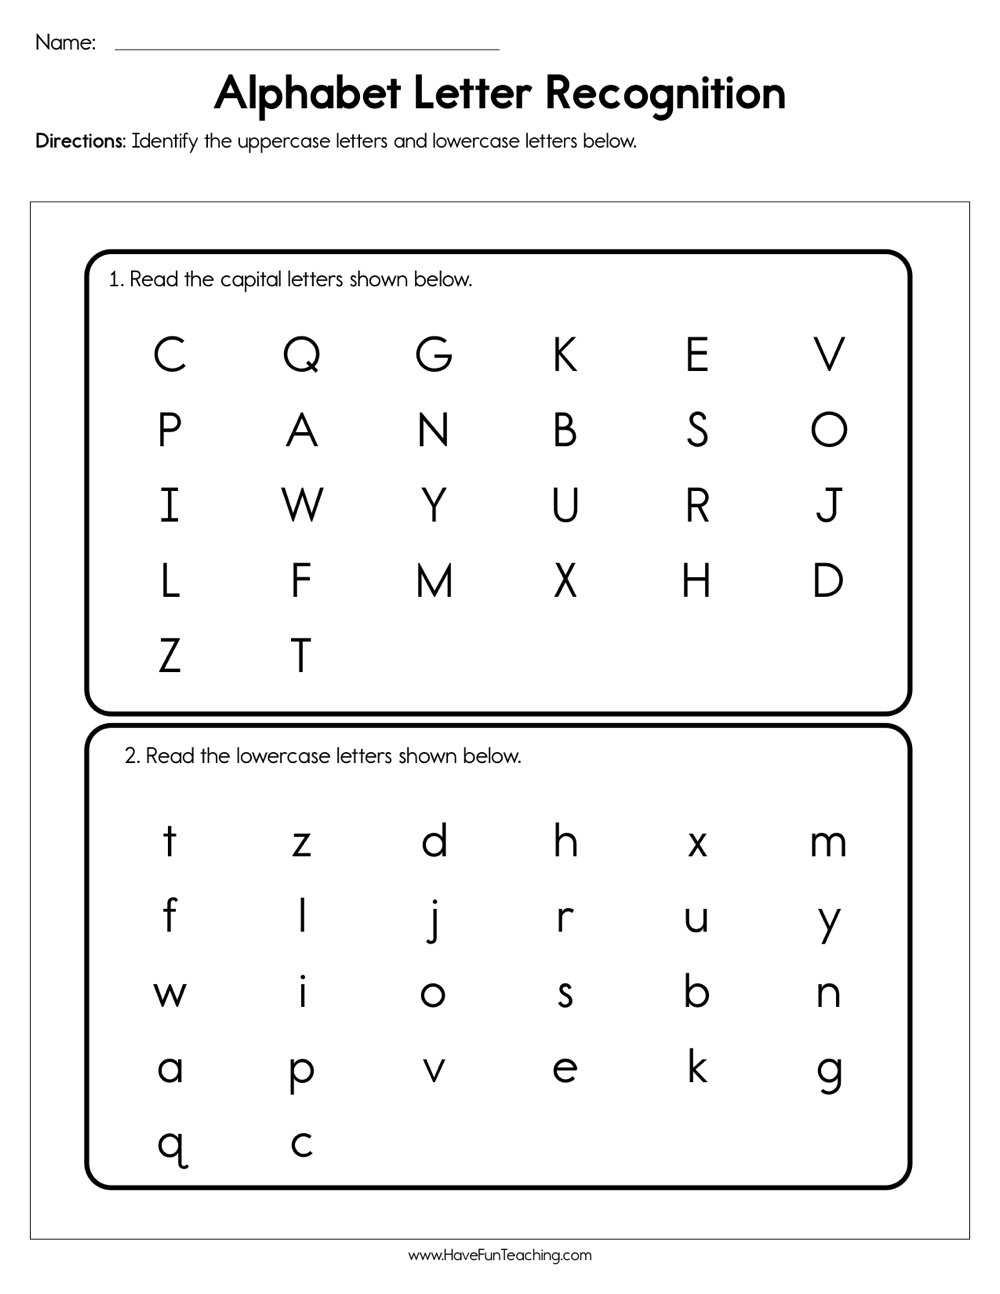 Alphabet Letter Recognition Assessment Have Fun Teaching